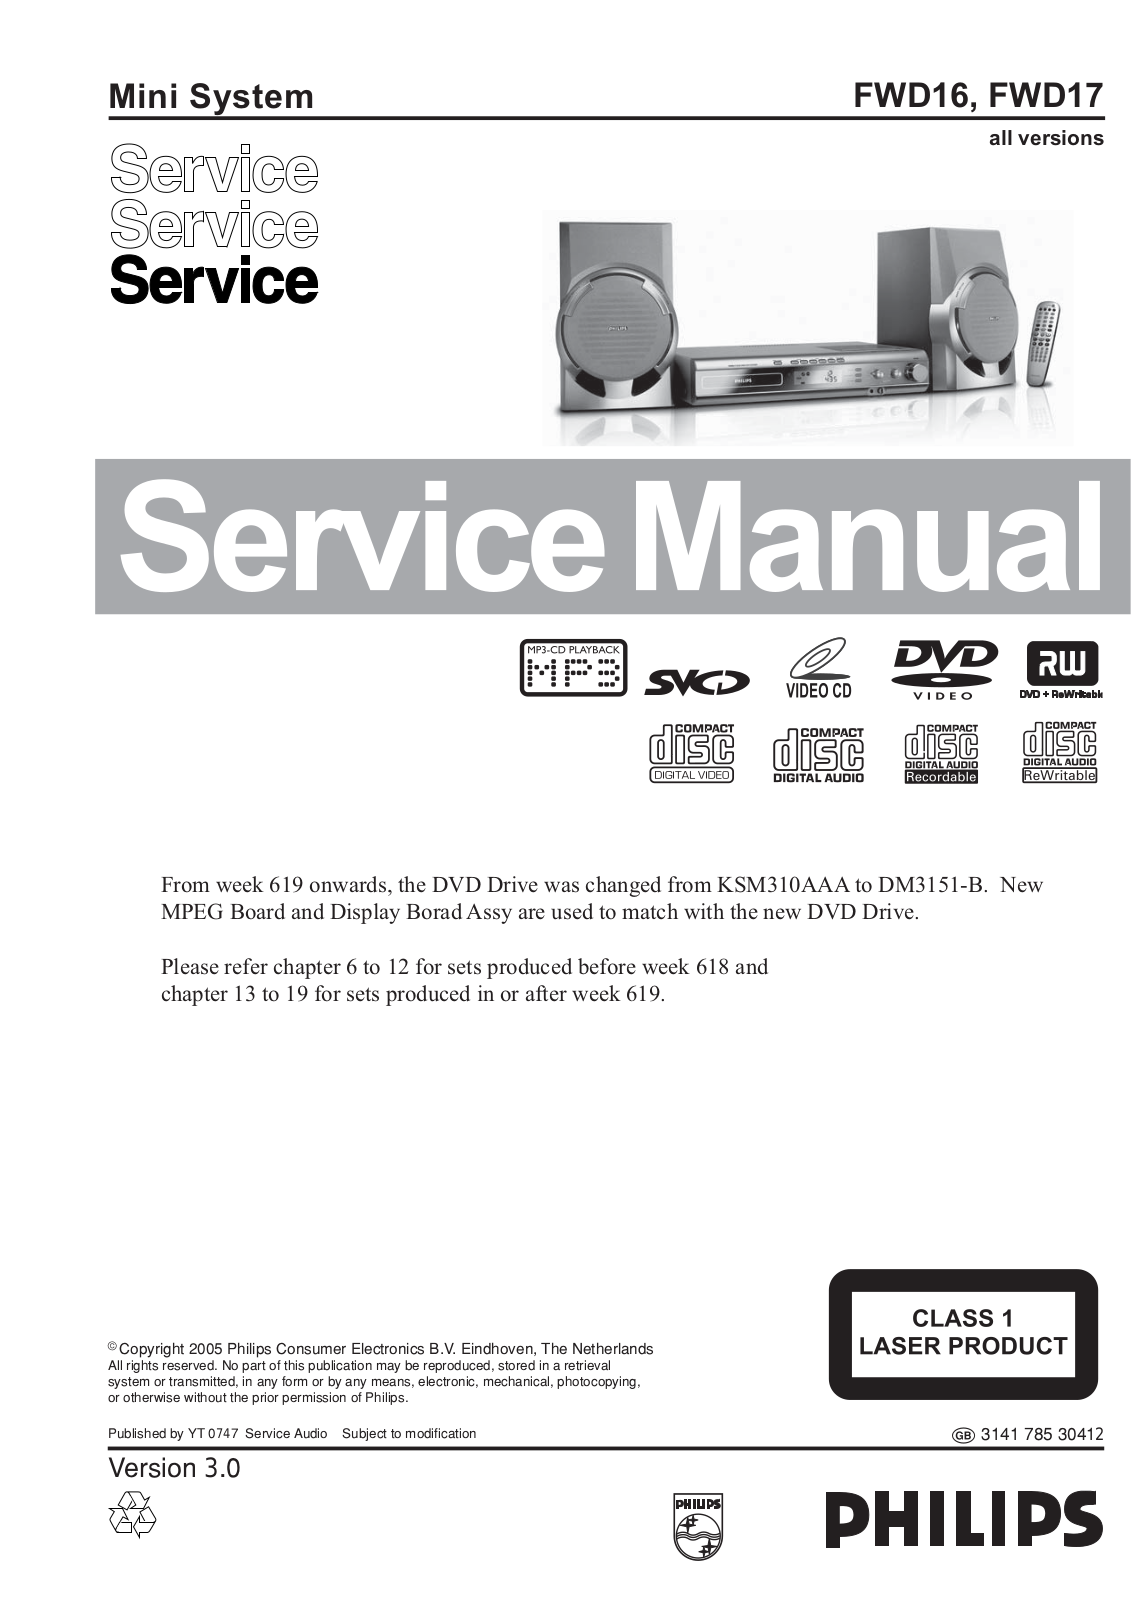 Philips FWD-17, FWD-16 Service manual